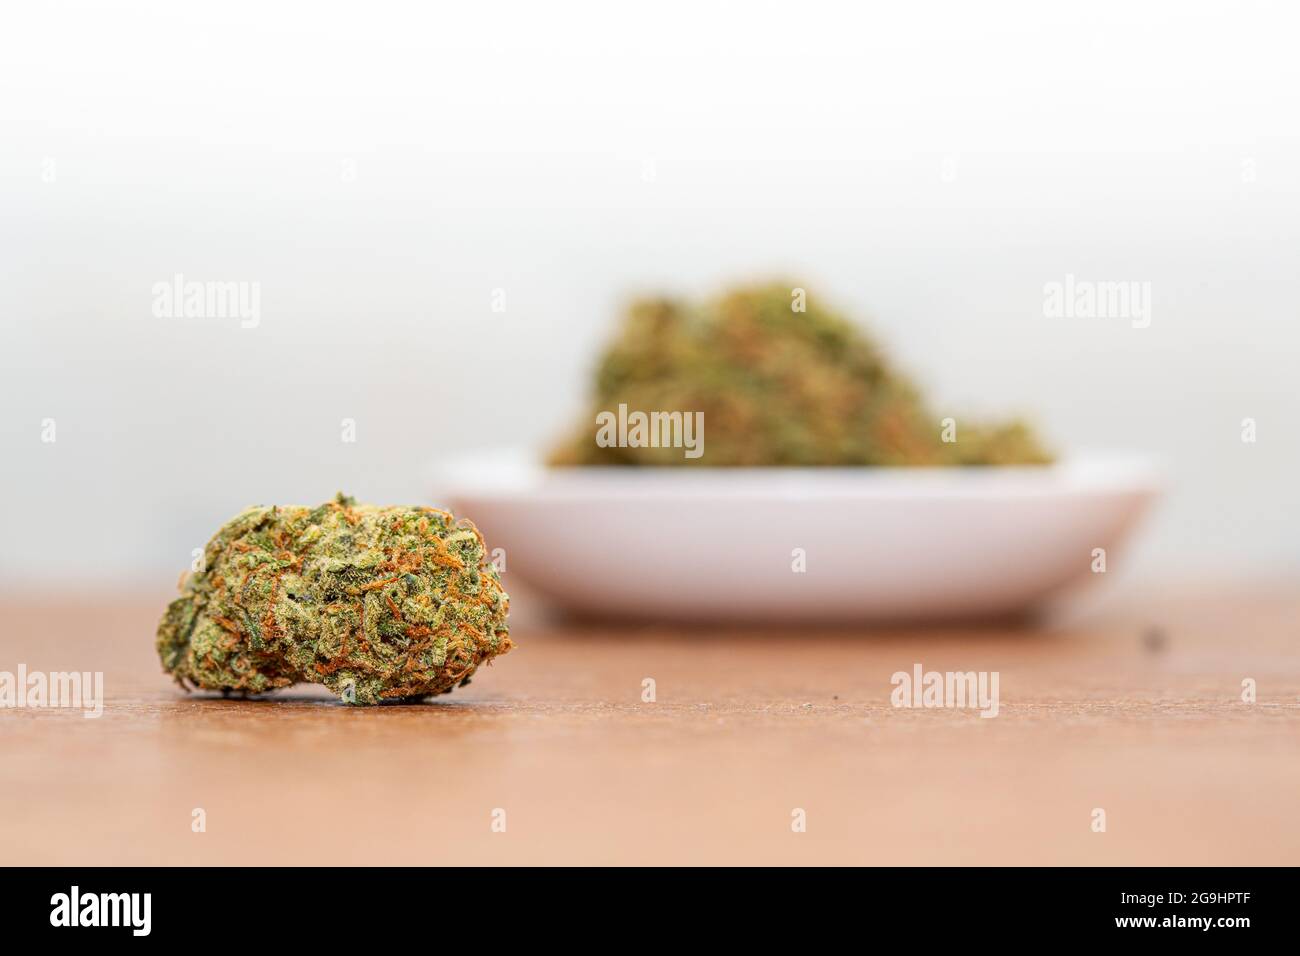 A small cannabis bud on a table with a blurry bowl in the background. Stock Photo